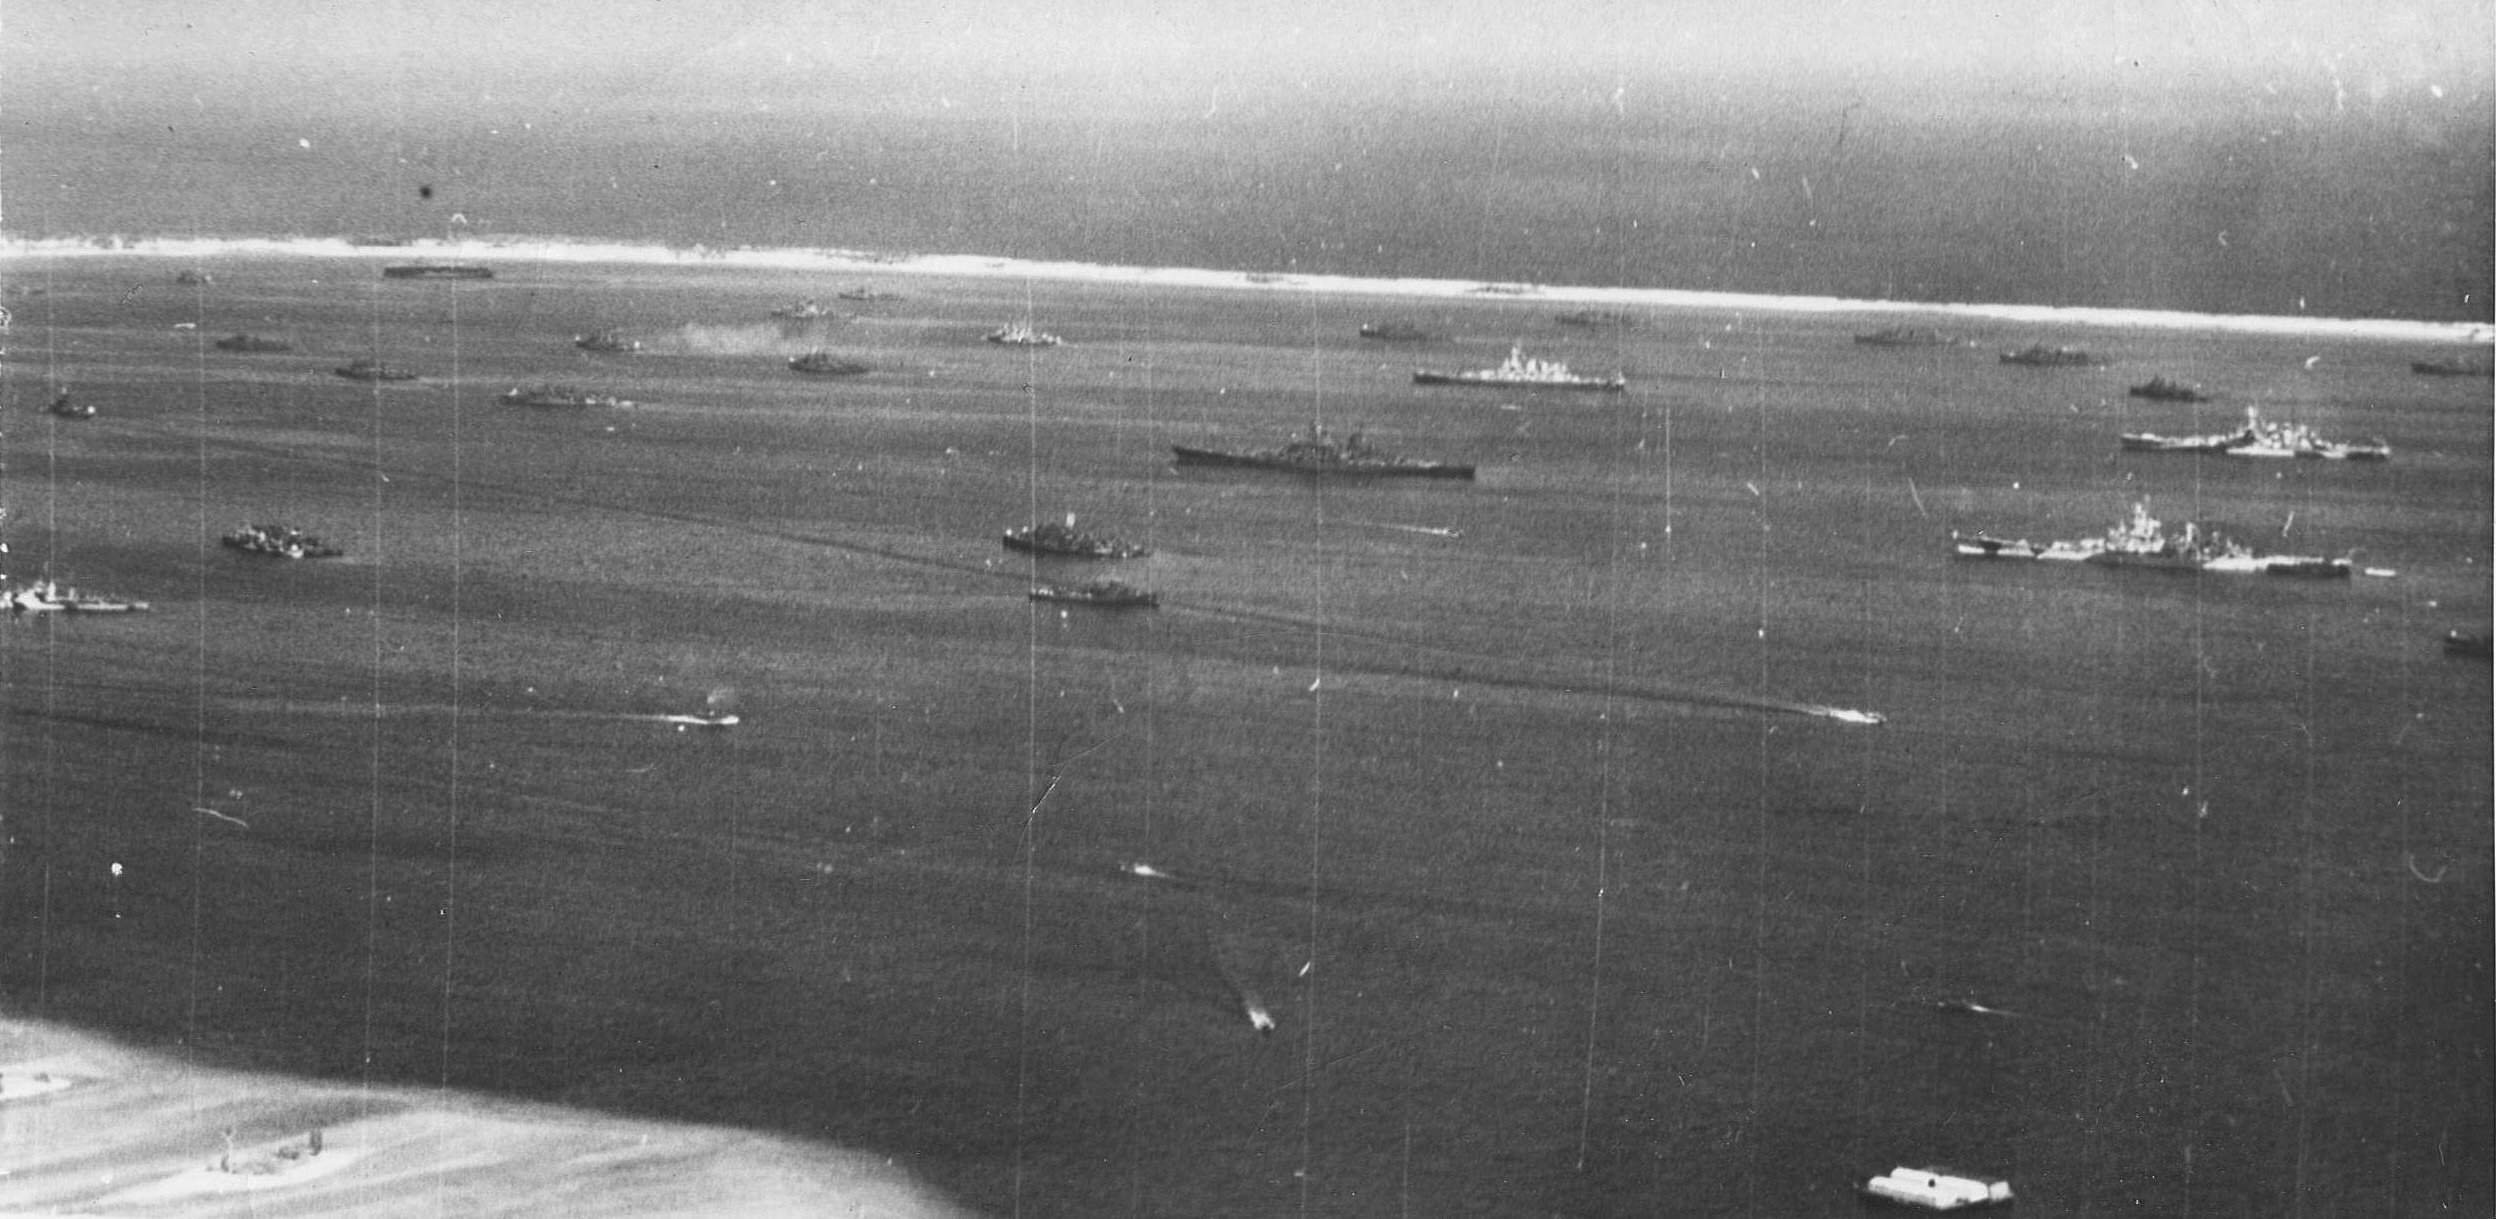 Four US battleships of Task Group 58.7 in the fleet anchorage at Majuro Atoll in the Marshall Islands, 8 Jul 1944